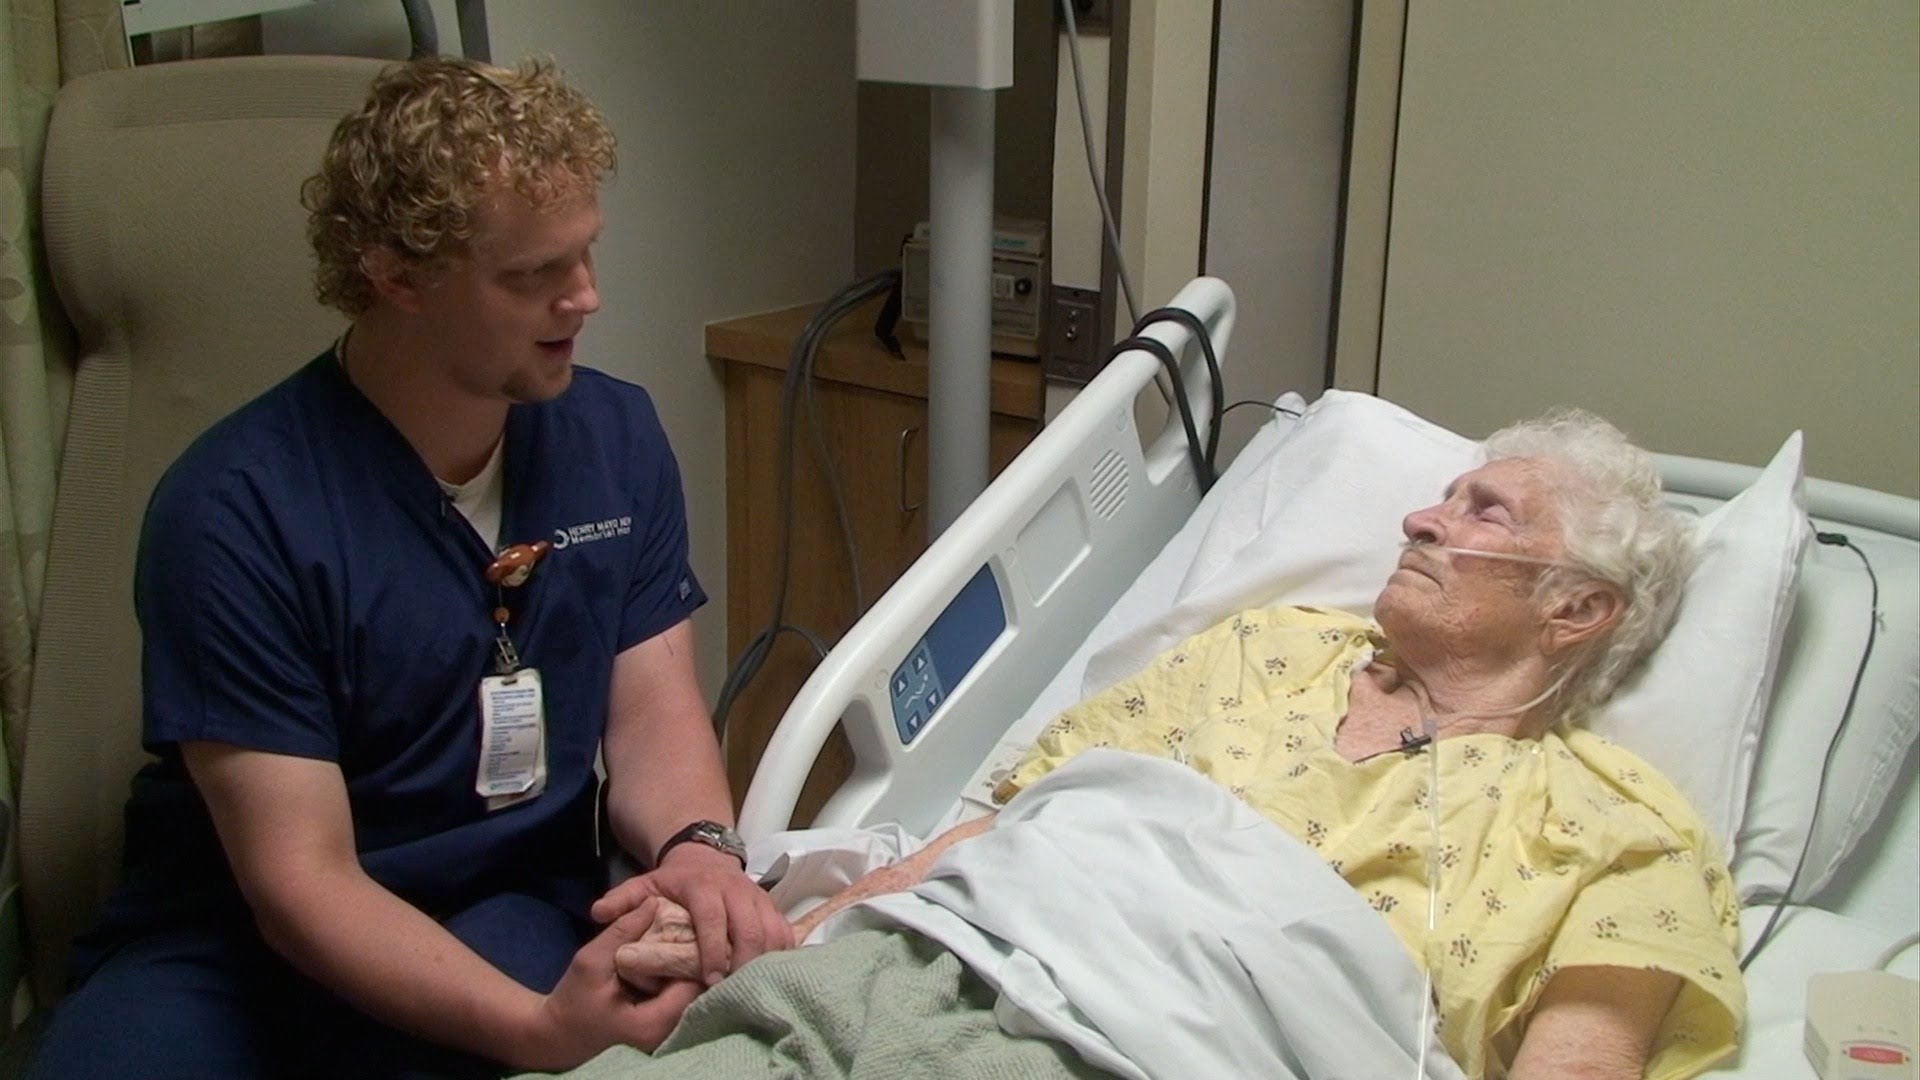 What This Male Nurse Does For His Older Patients Will Leave You In